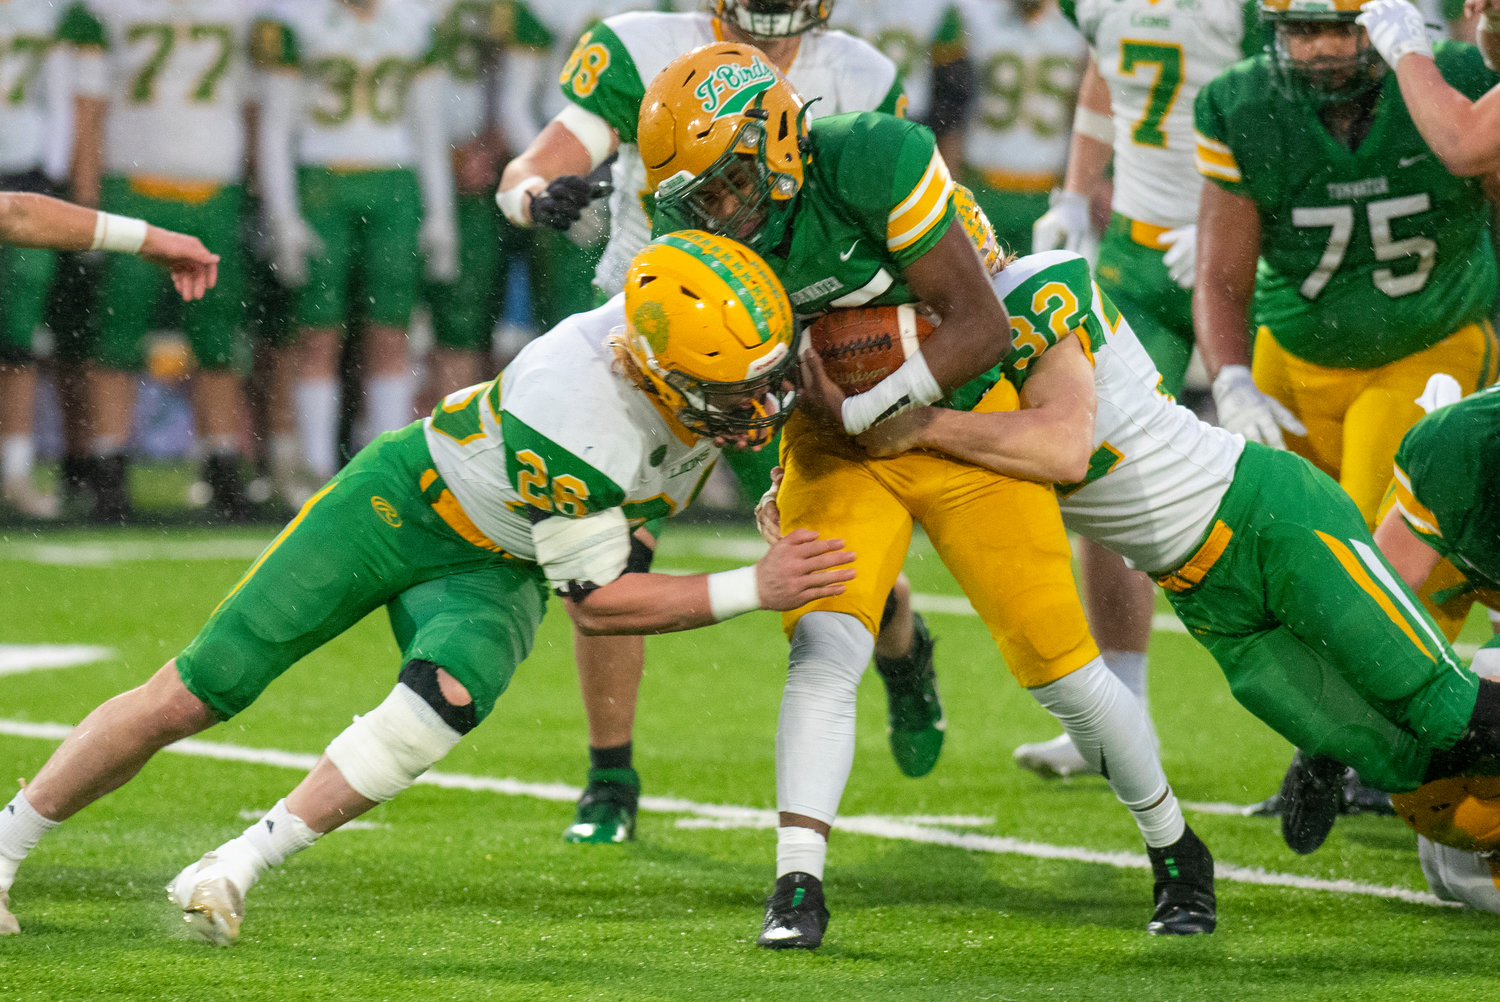 Tumwater running back Carlos Matheney goes head-to-head with a Lynden player during the 2A state title game on Dec. 4.